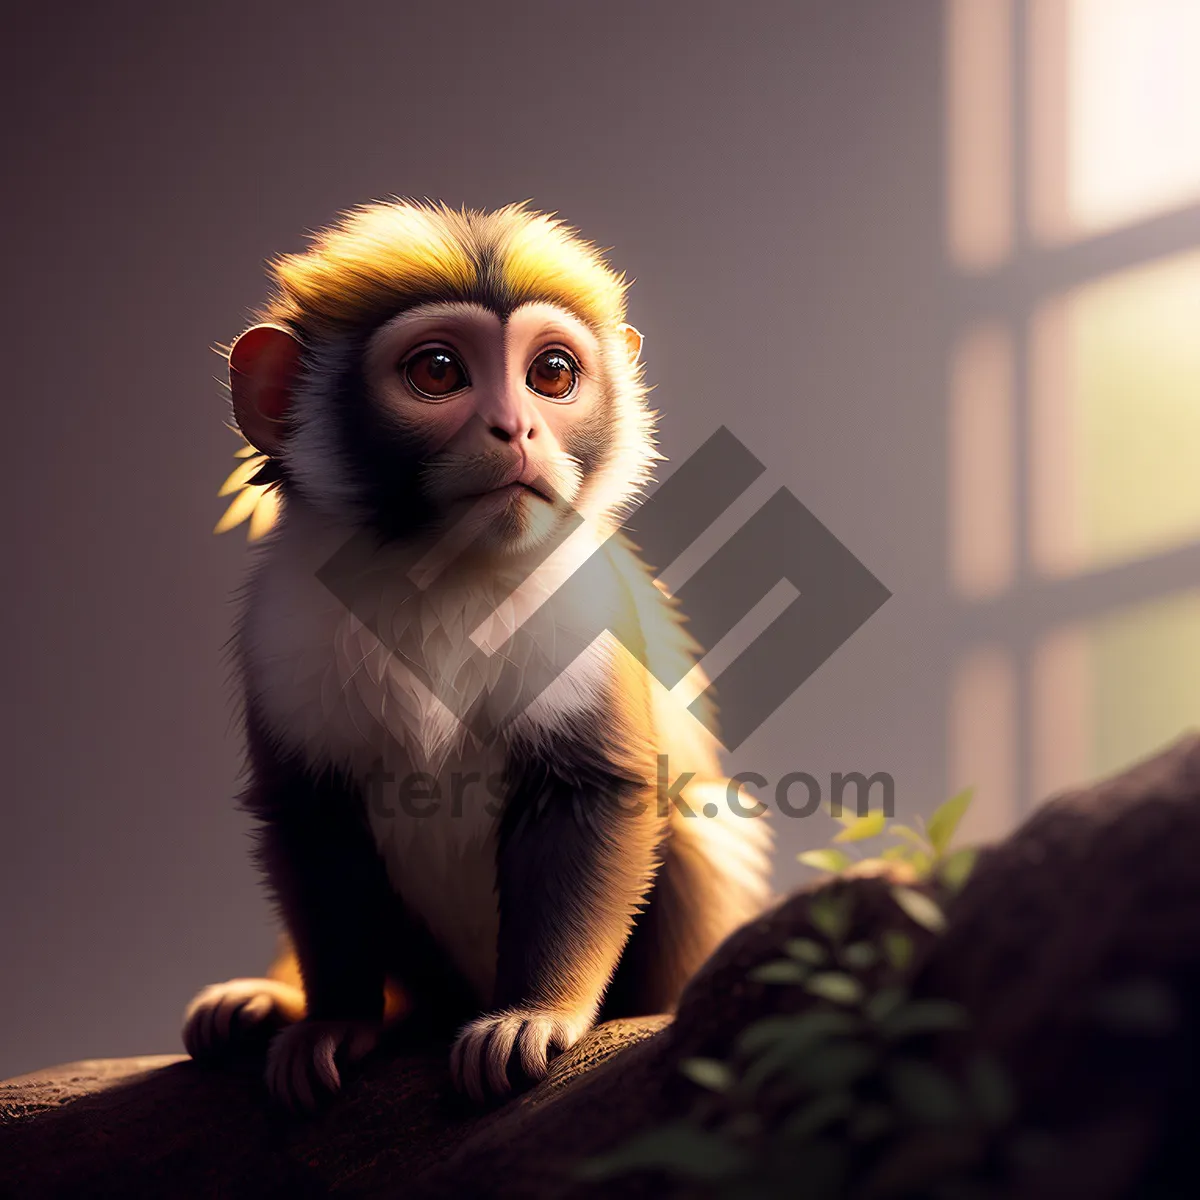 Picture of Cute Macaque Monkey in Natural Jungle Setting